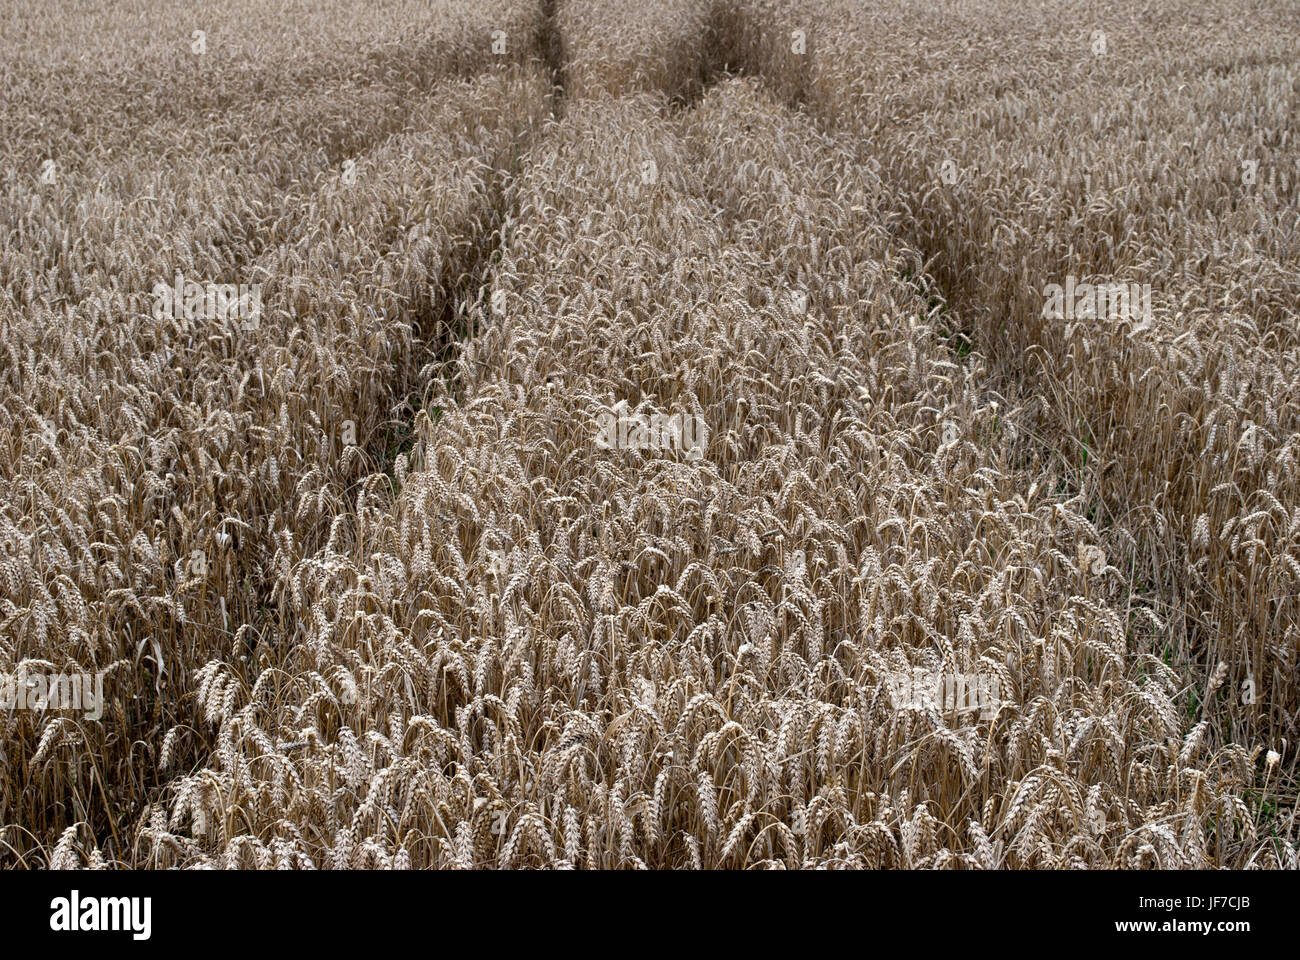 Wheat field with tractor ruts Stock Photo